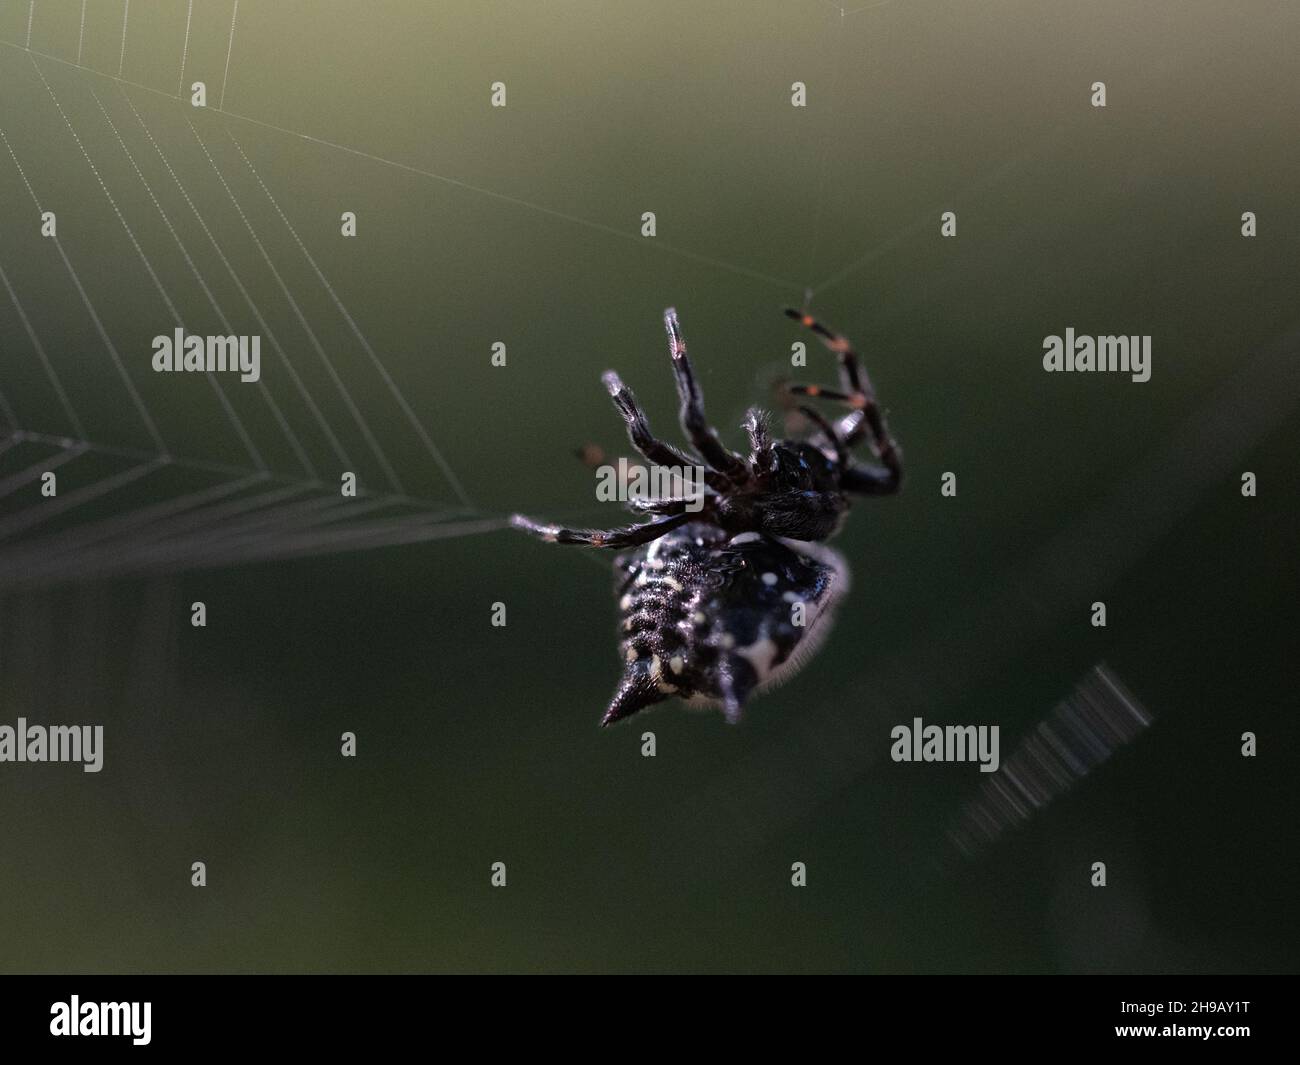 Close up of a spiny-backed orbweaver or spiny orb weaver spider photographed with extremely shallow depth of field while it is building a web. Stock Photo